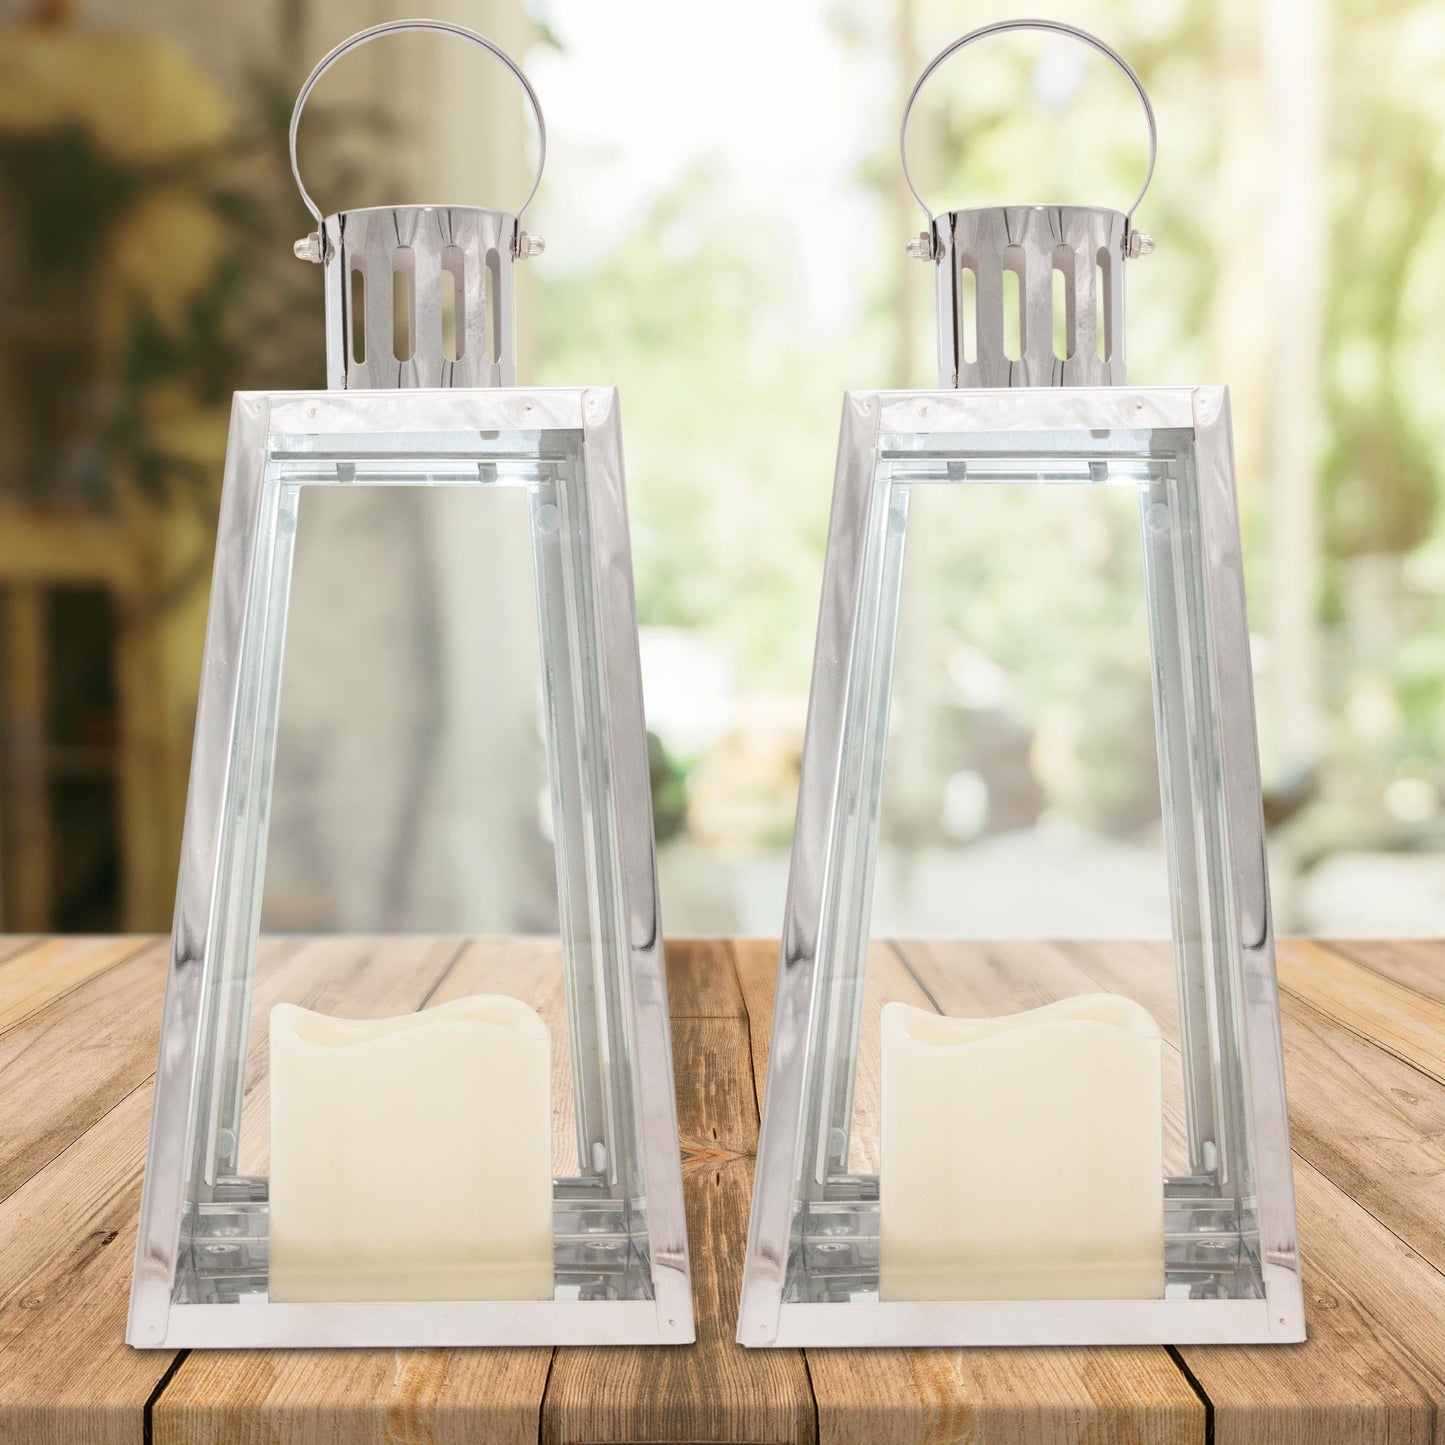 Lewis's Triangular Lanterns Candle Holders with Candles Set of 2 Large- 14.5x13.5x28.5cm